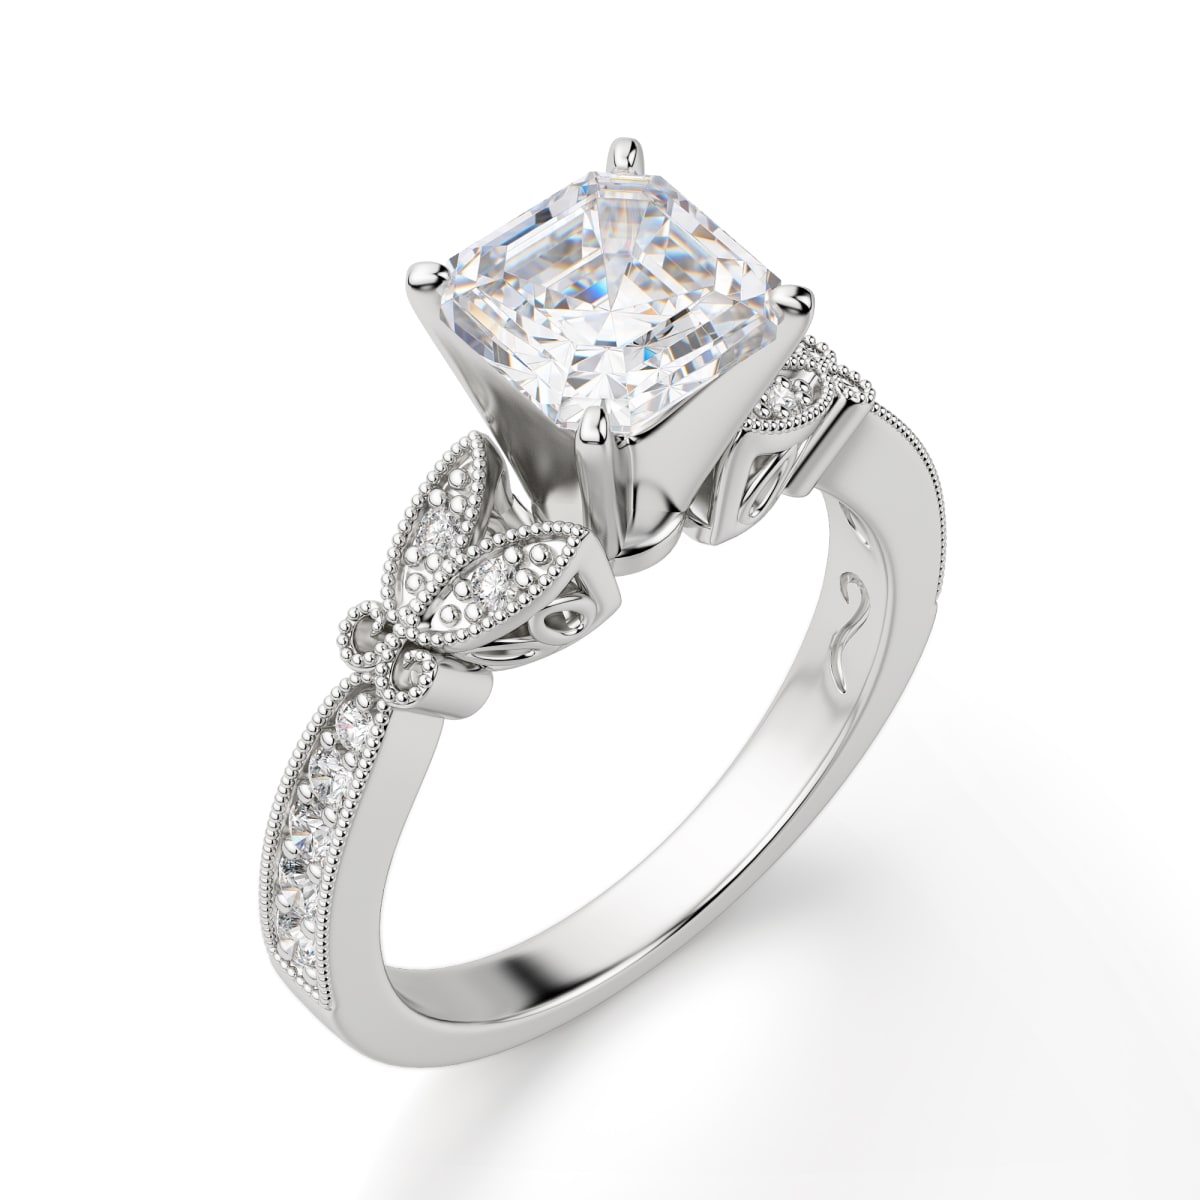 Asscher Cut Diamond Engagement Ring – To Hold And To Have